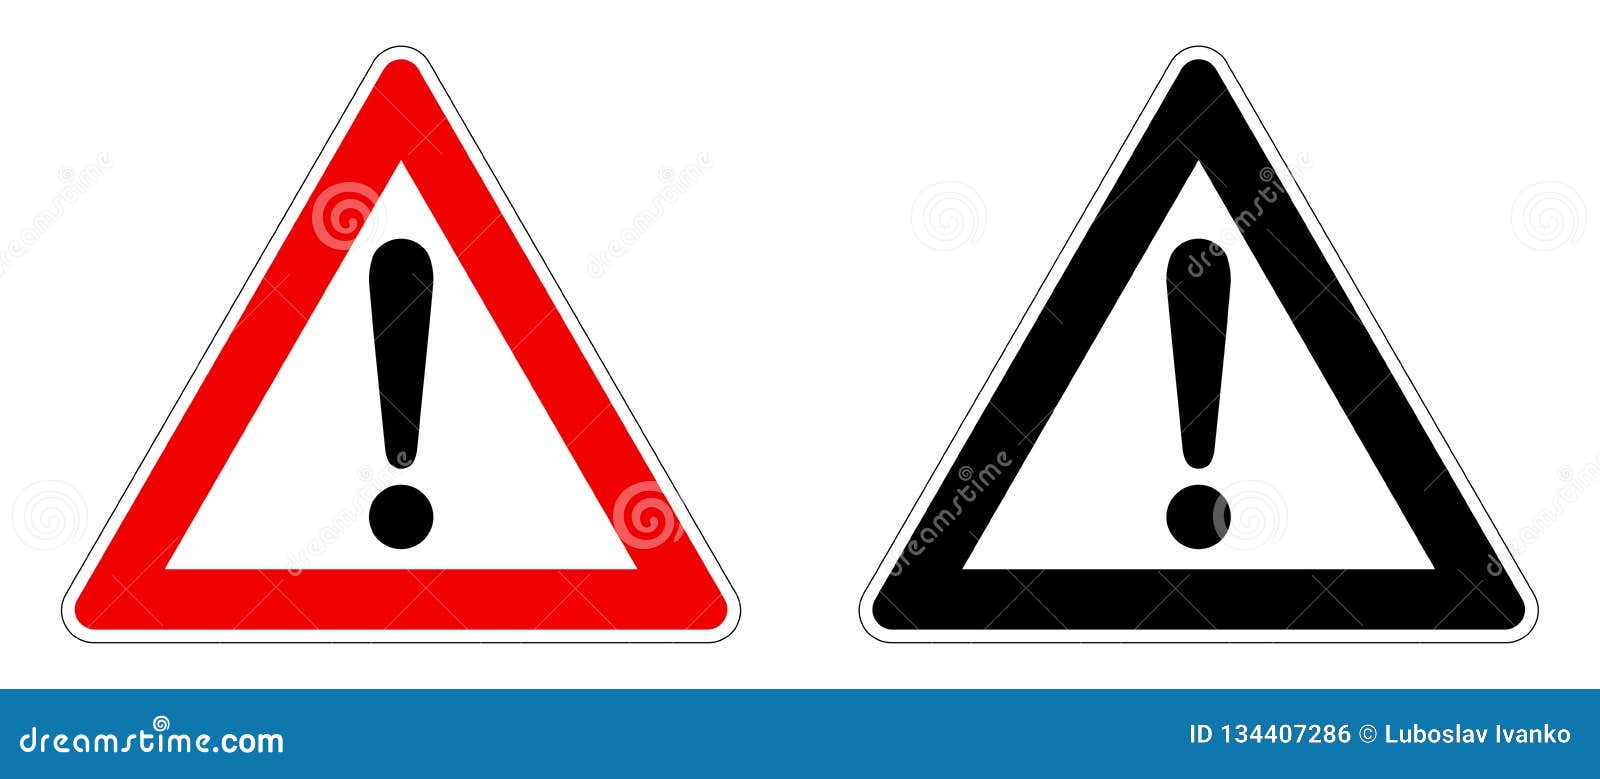 warning / attention sign. exclamation mark in triangle. red / black and white version